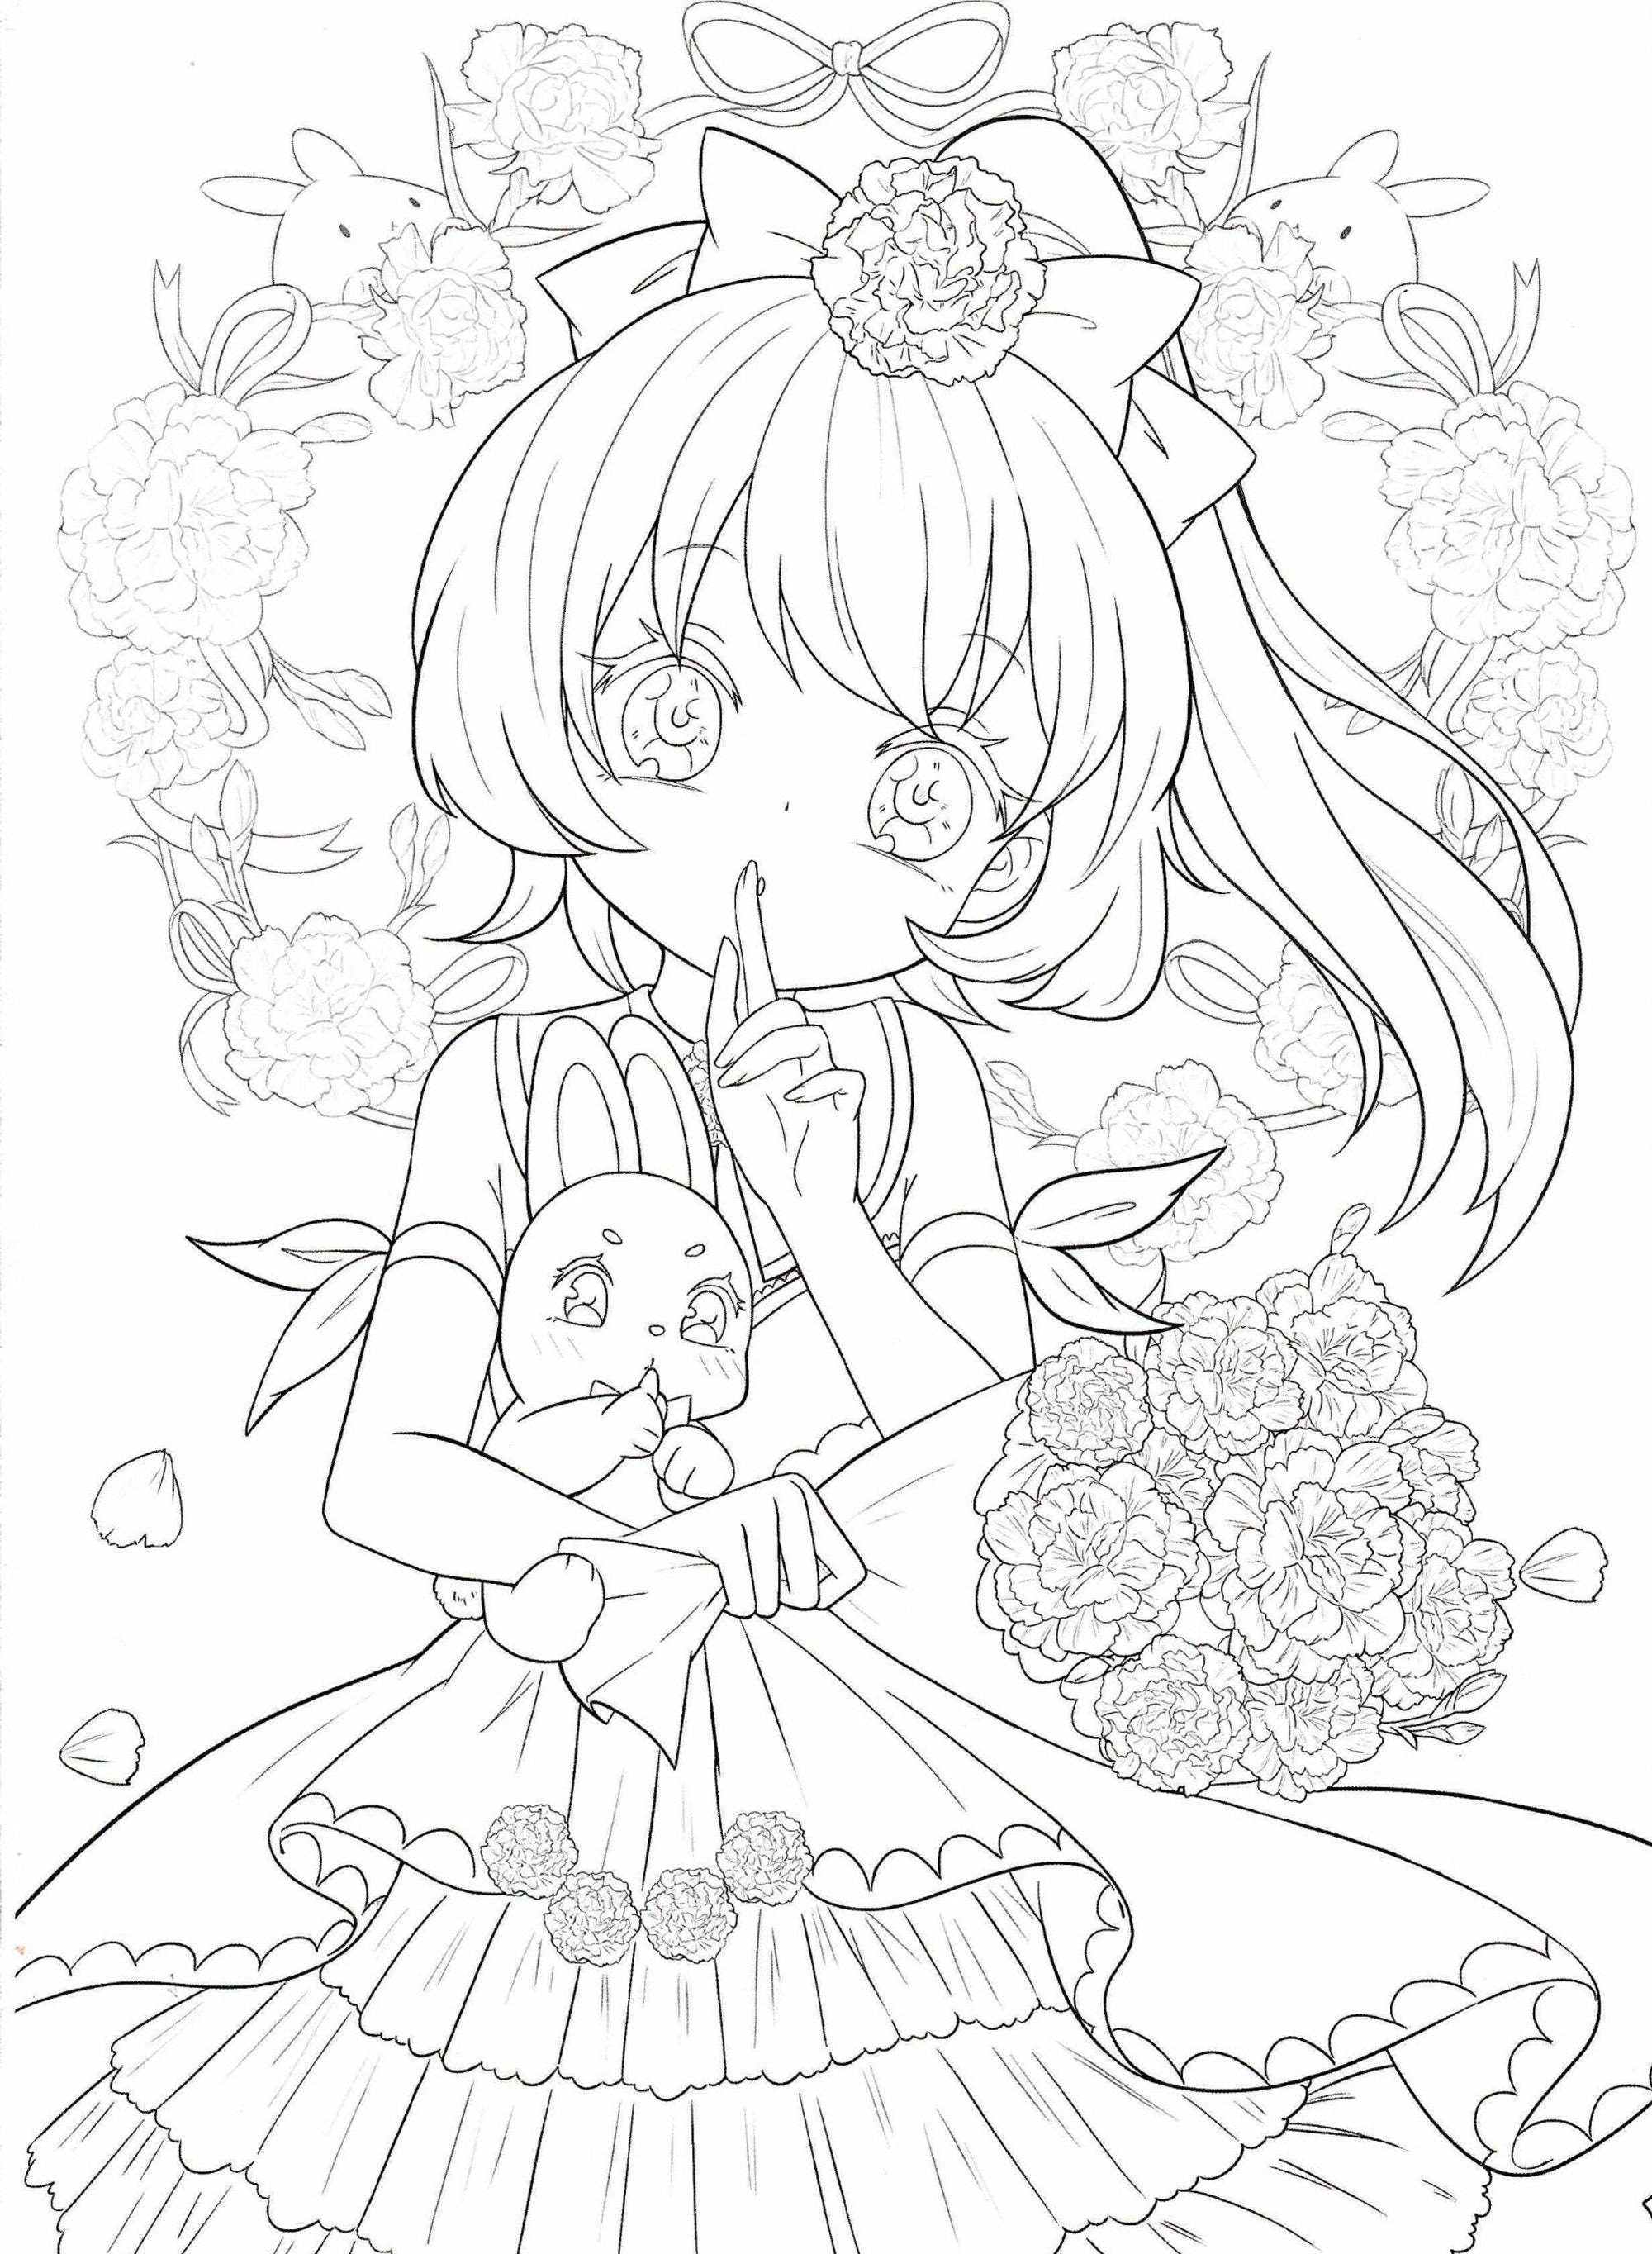 Chinese Coloring Book For Adults Flower and Mengnianglovely Anime girls  Coloring Pages Printable PDF Download -  Polska